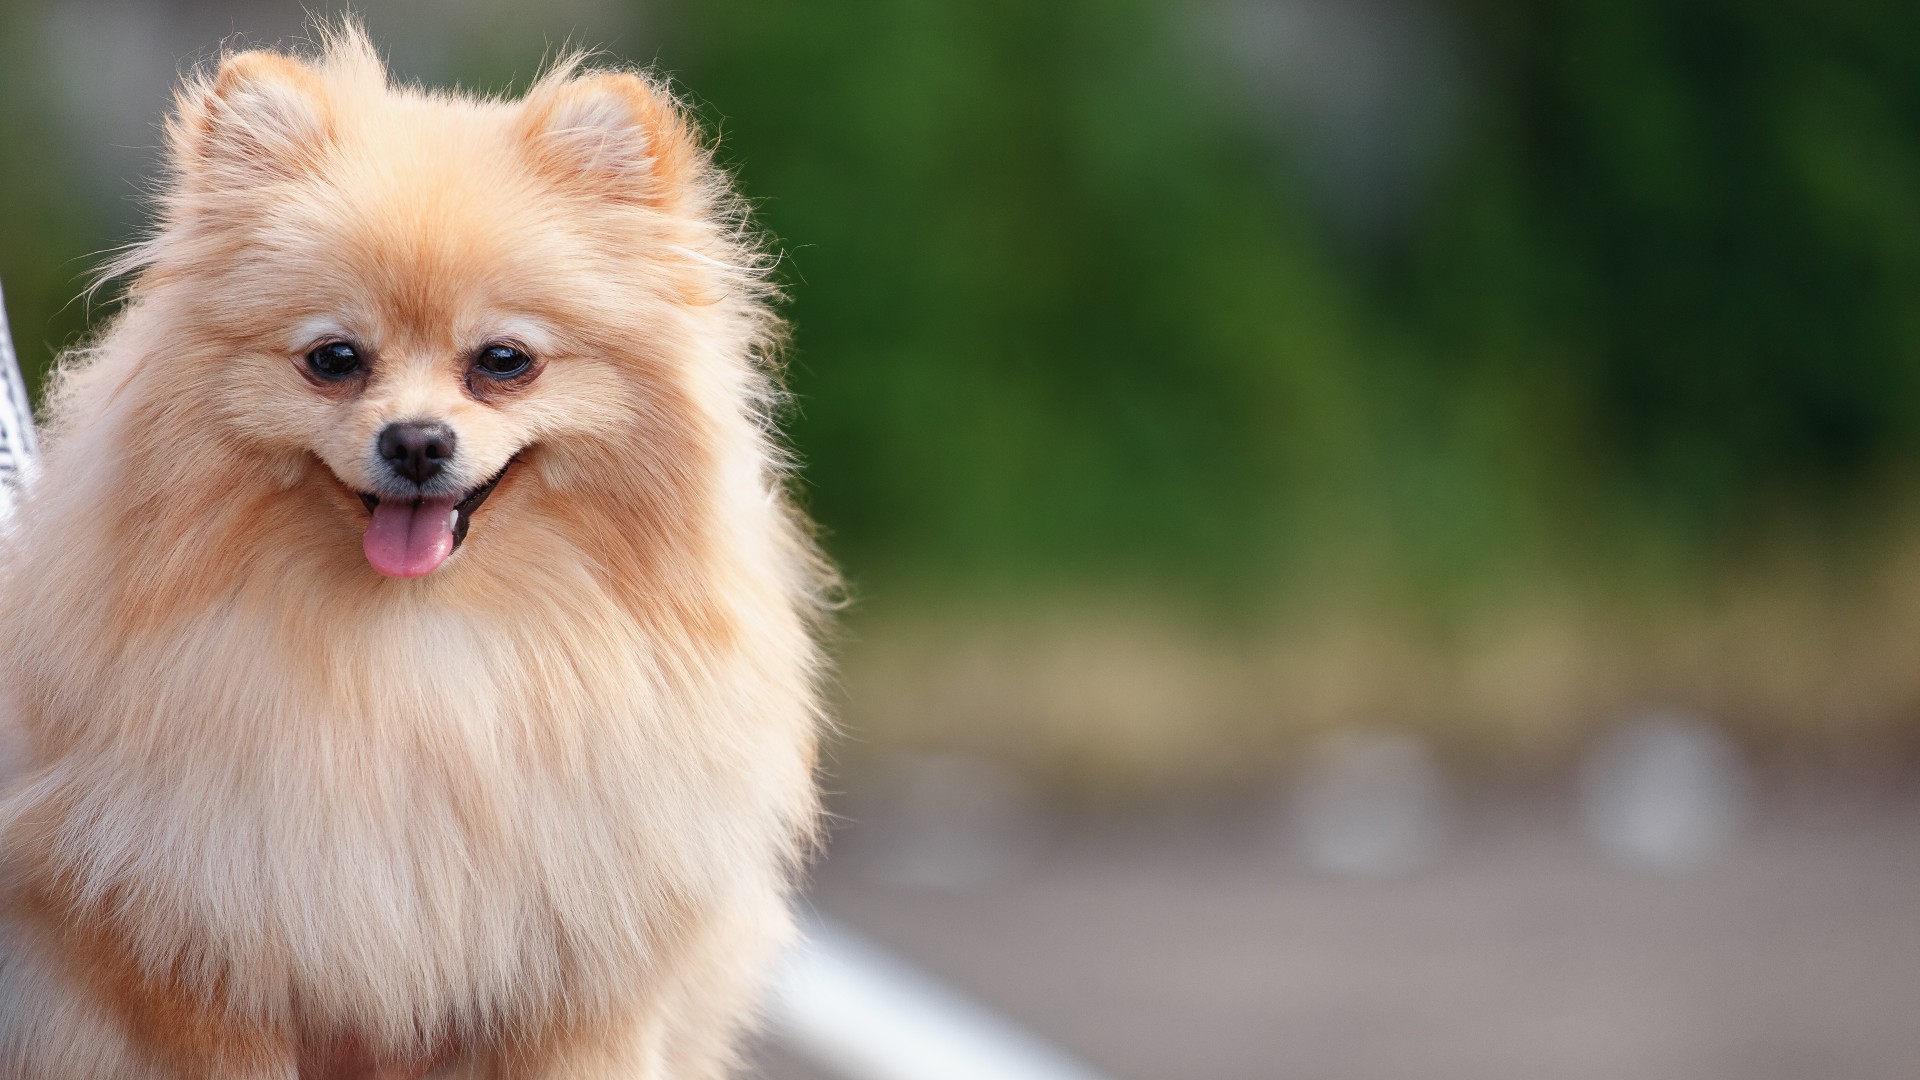 Close up of Pomeranian outside with blurred background